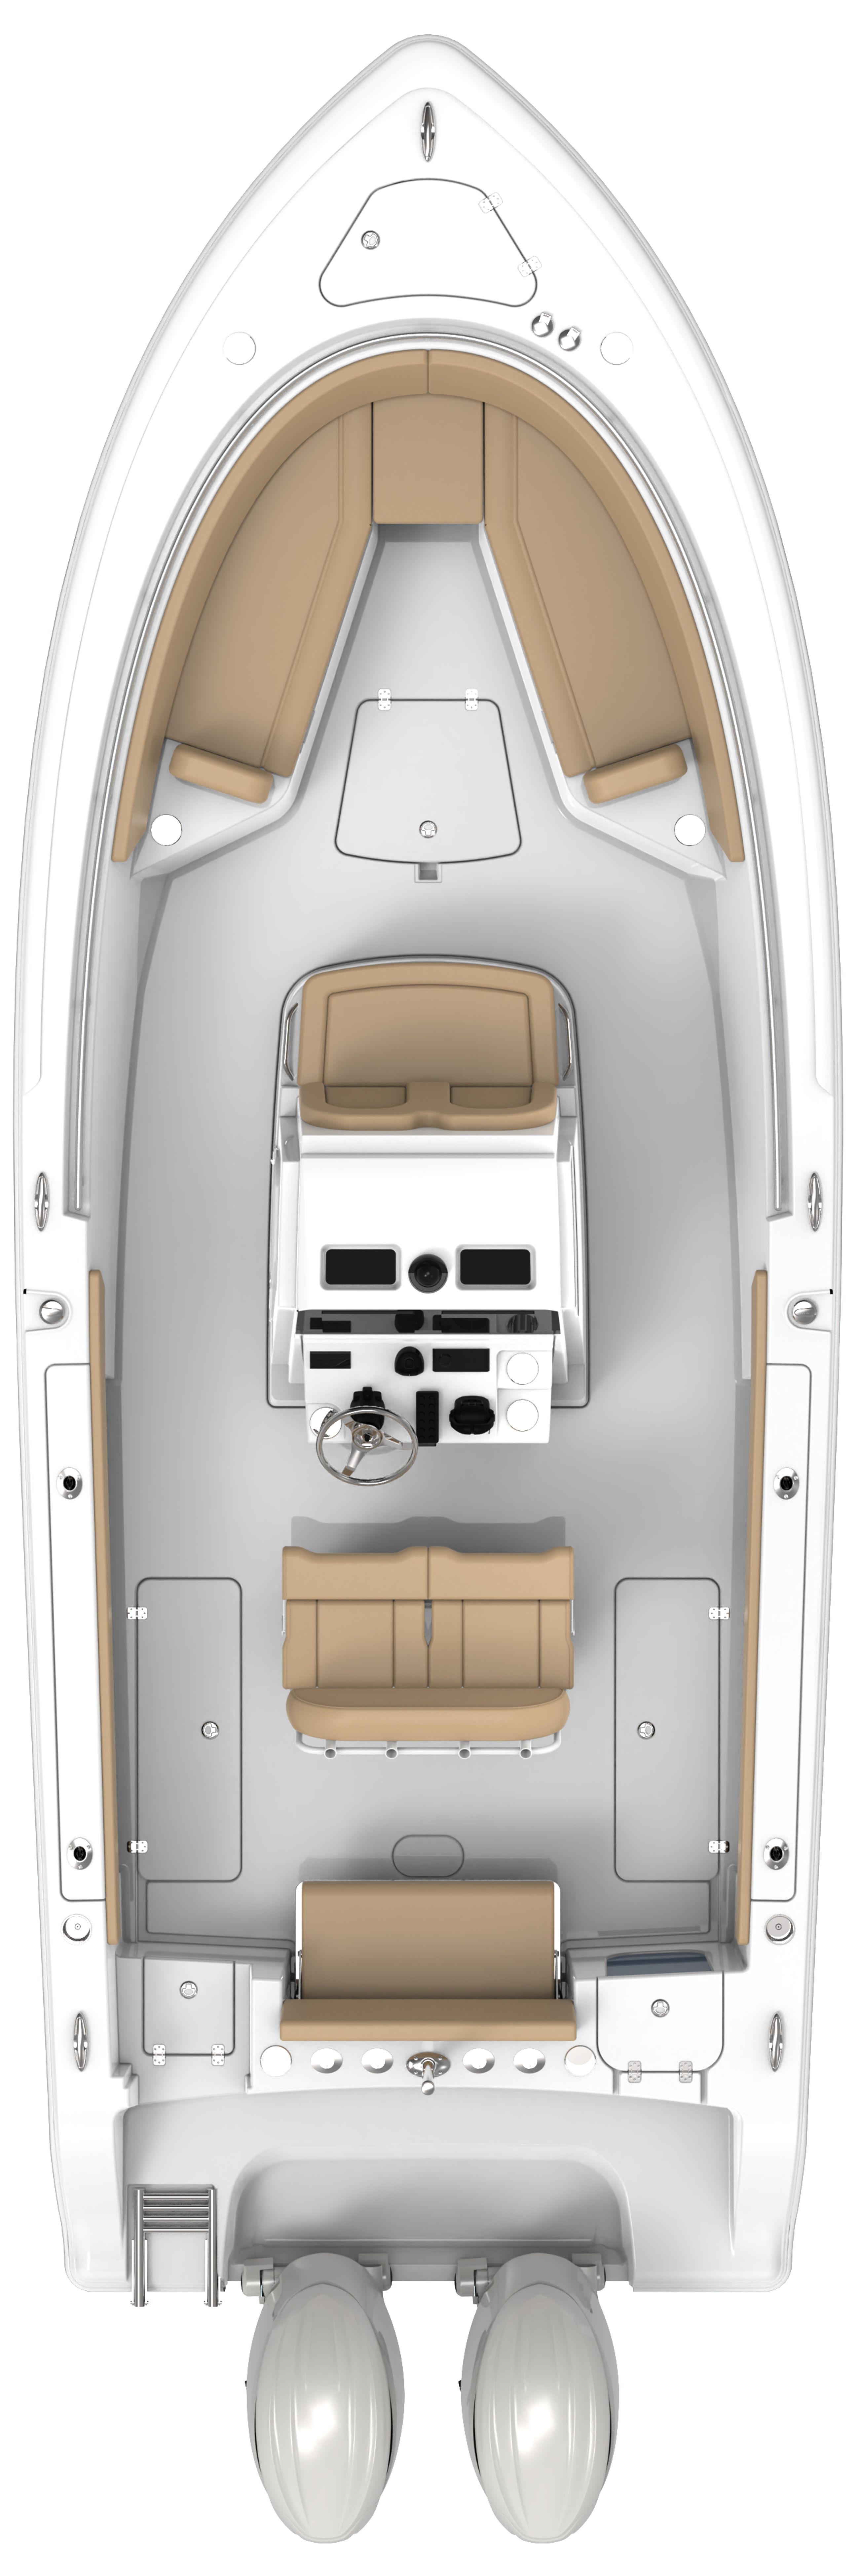 Overhead image of the 252-center-console